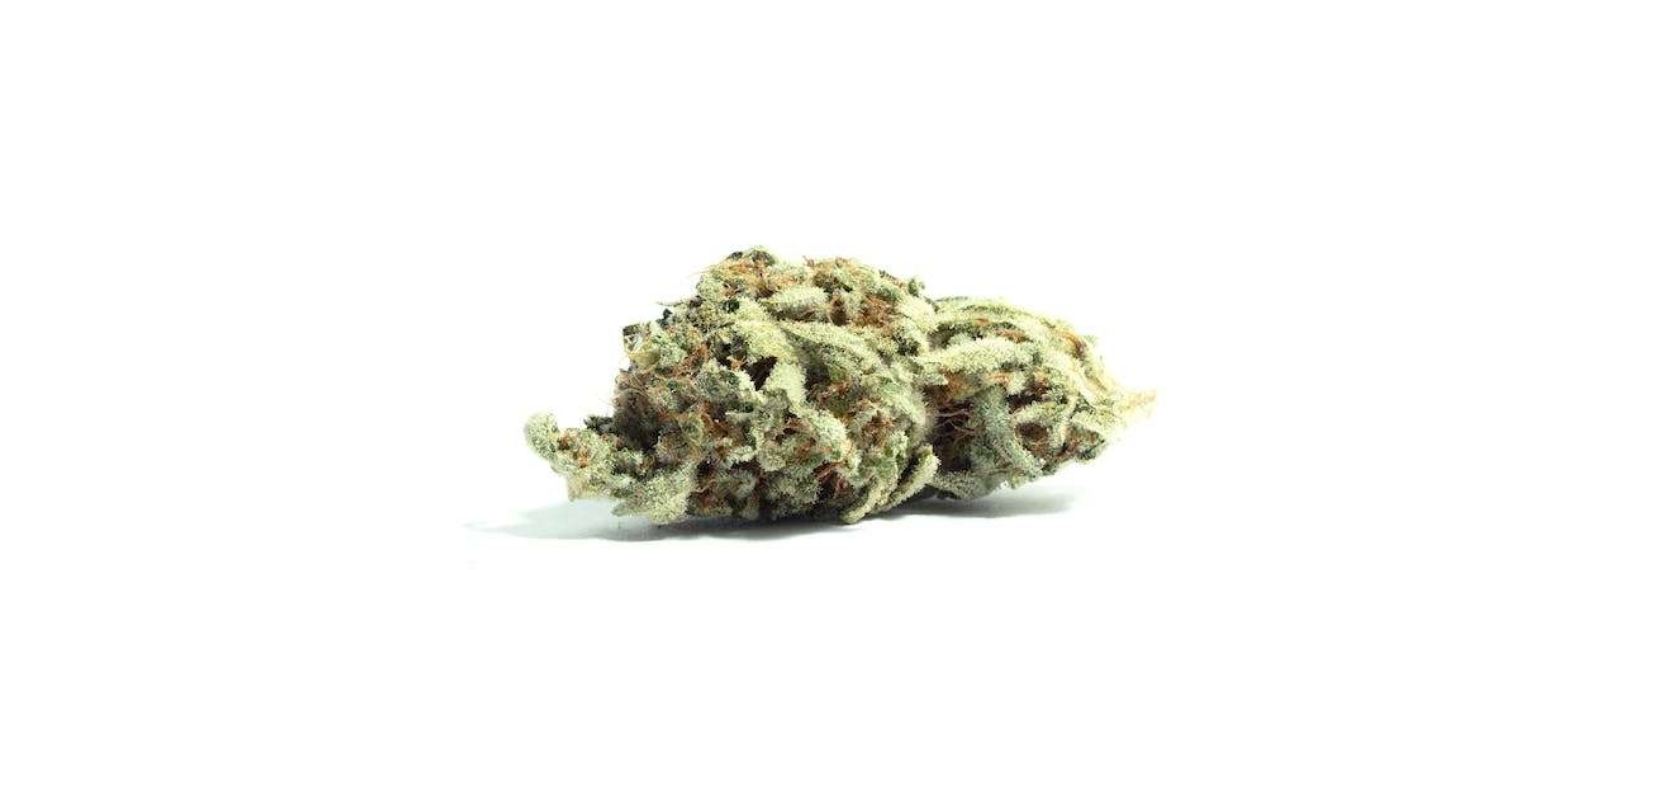 The Rainbow Sherbet strain is a tempting evenly balanced hybrid (50:50 Indica to Sativa ratio), with THC levels hovering between 20 to 22 percent. 